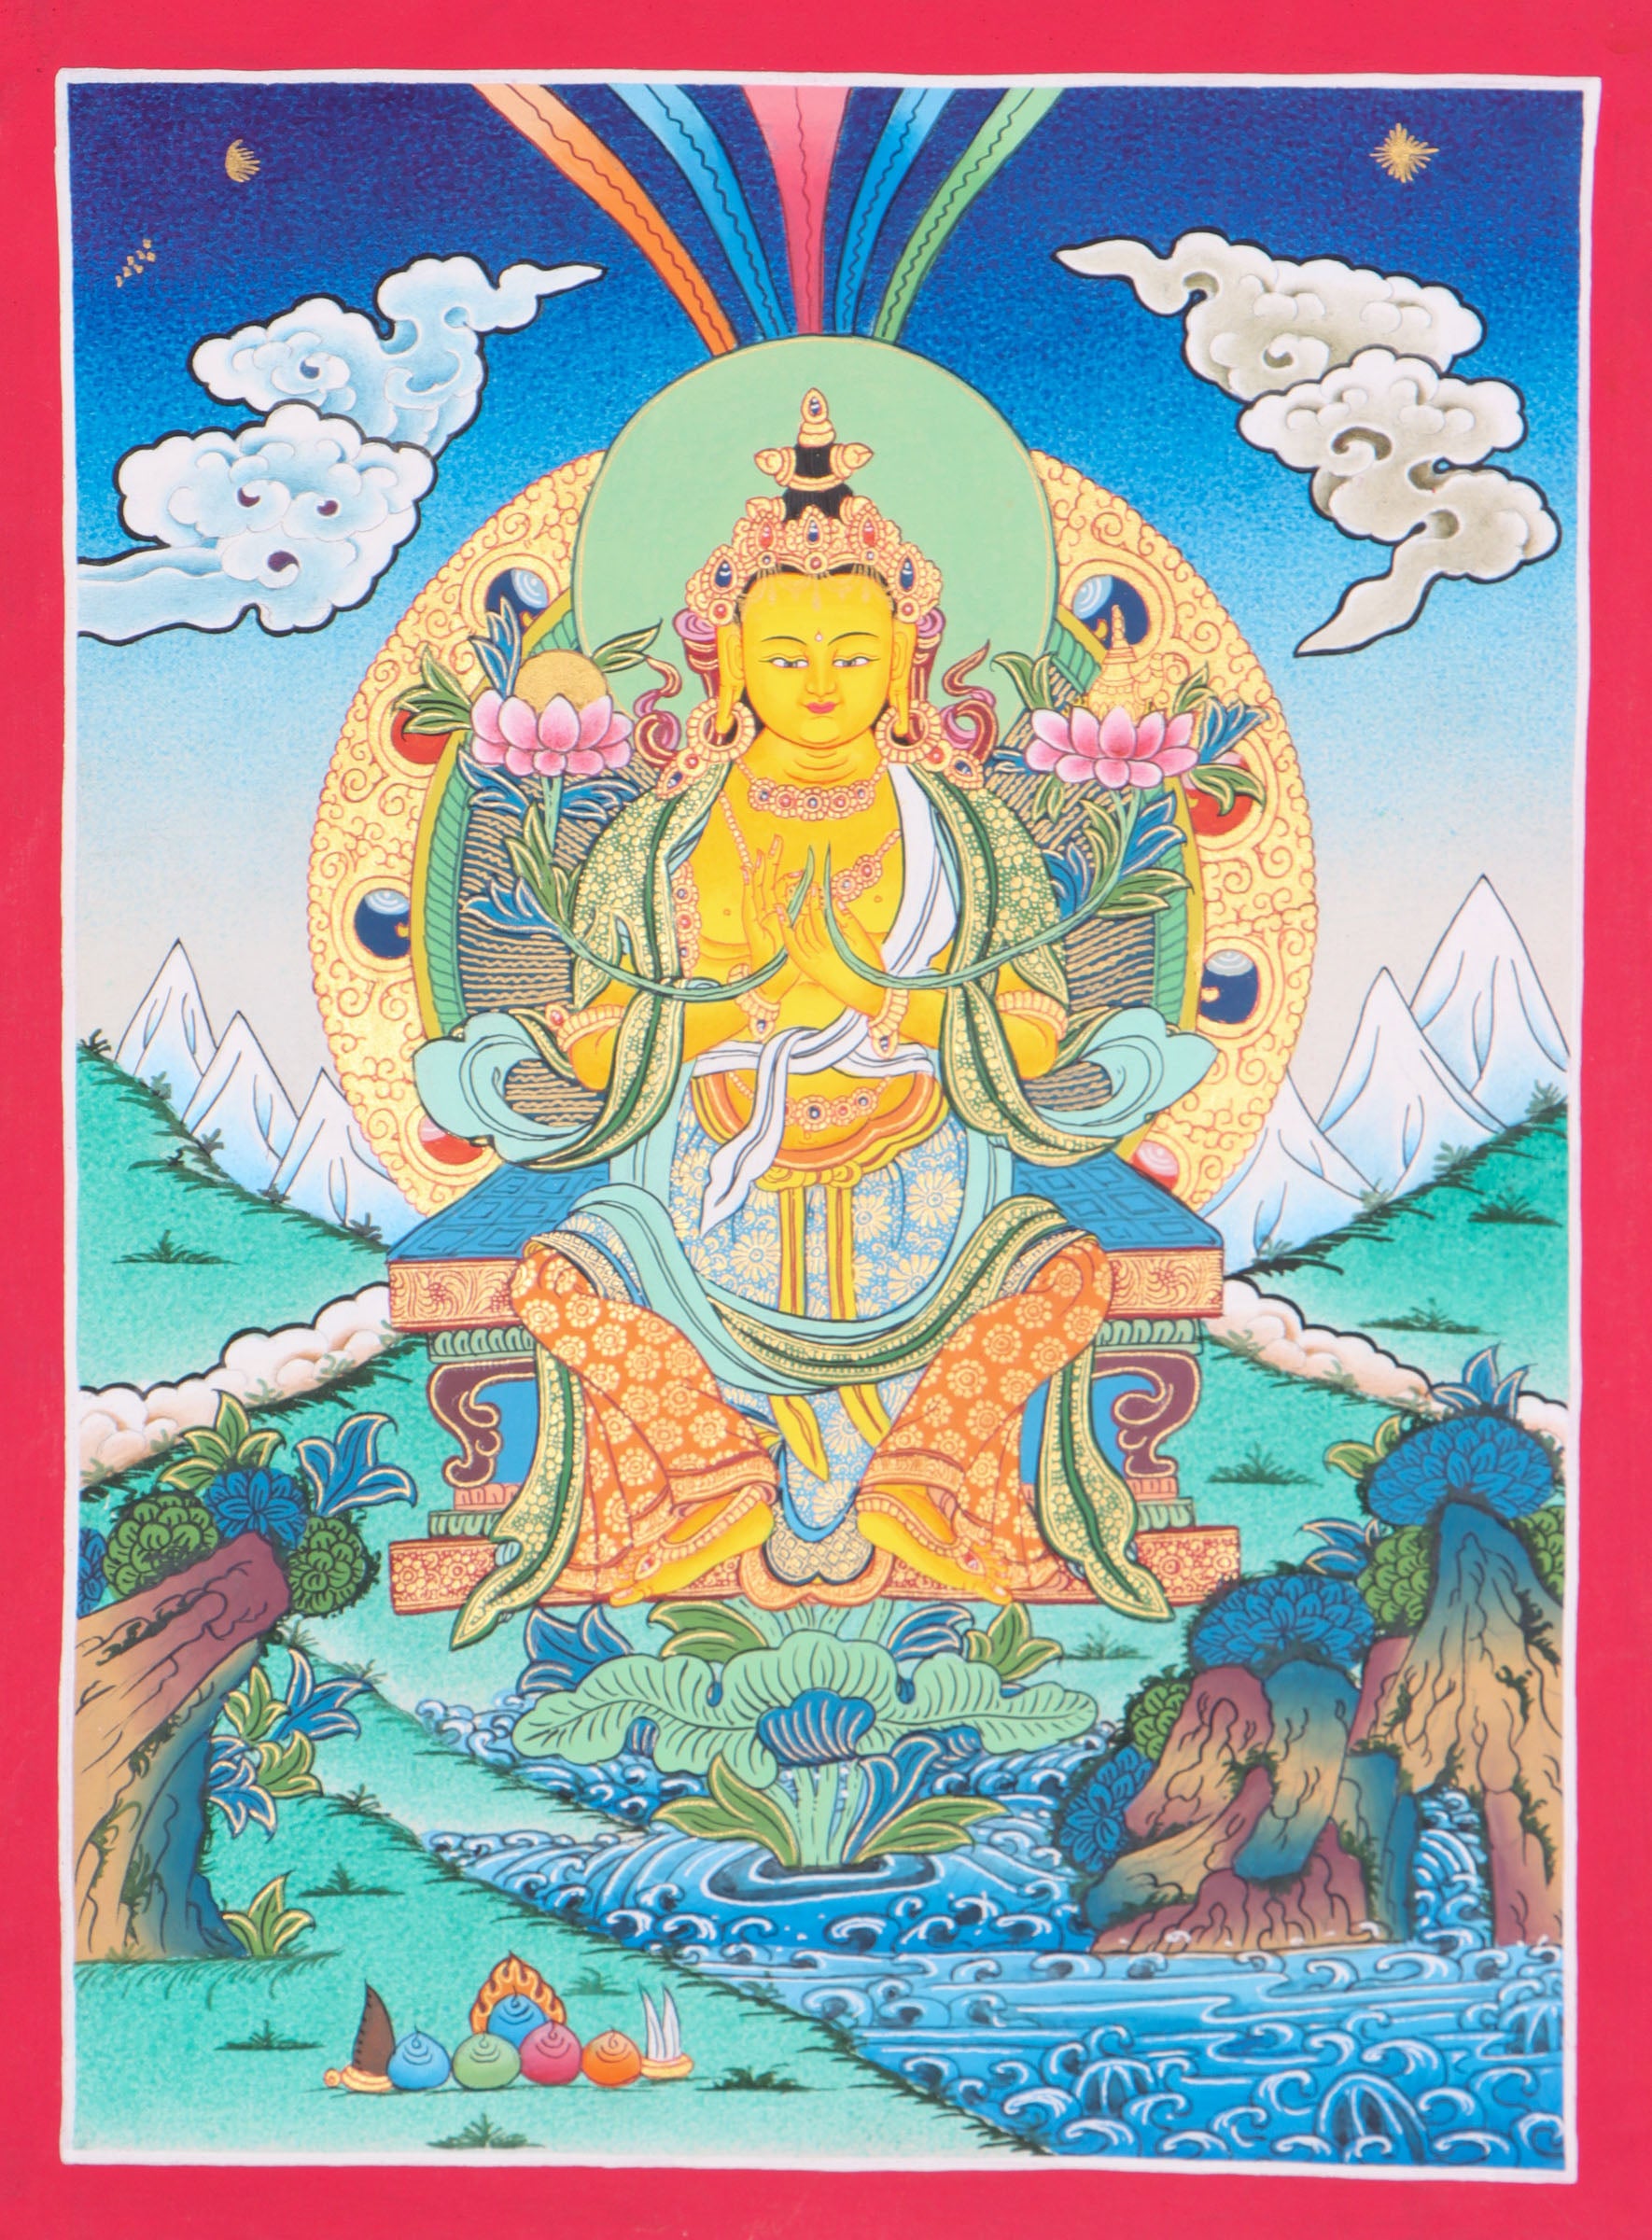 Maitreya Buddha Thangka Art is ideal for meditation and the development of physical and mental wellbeing.